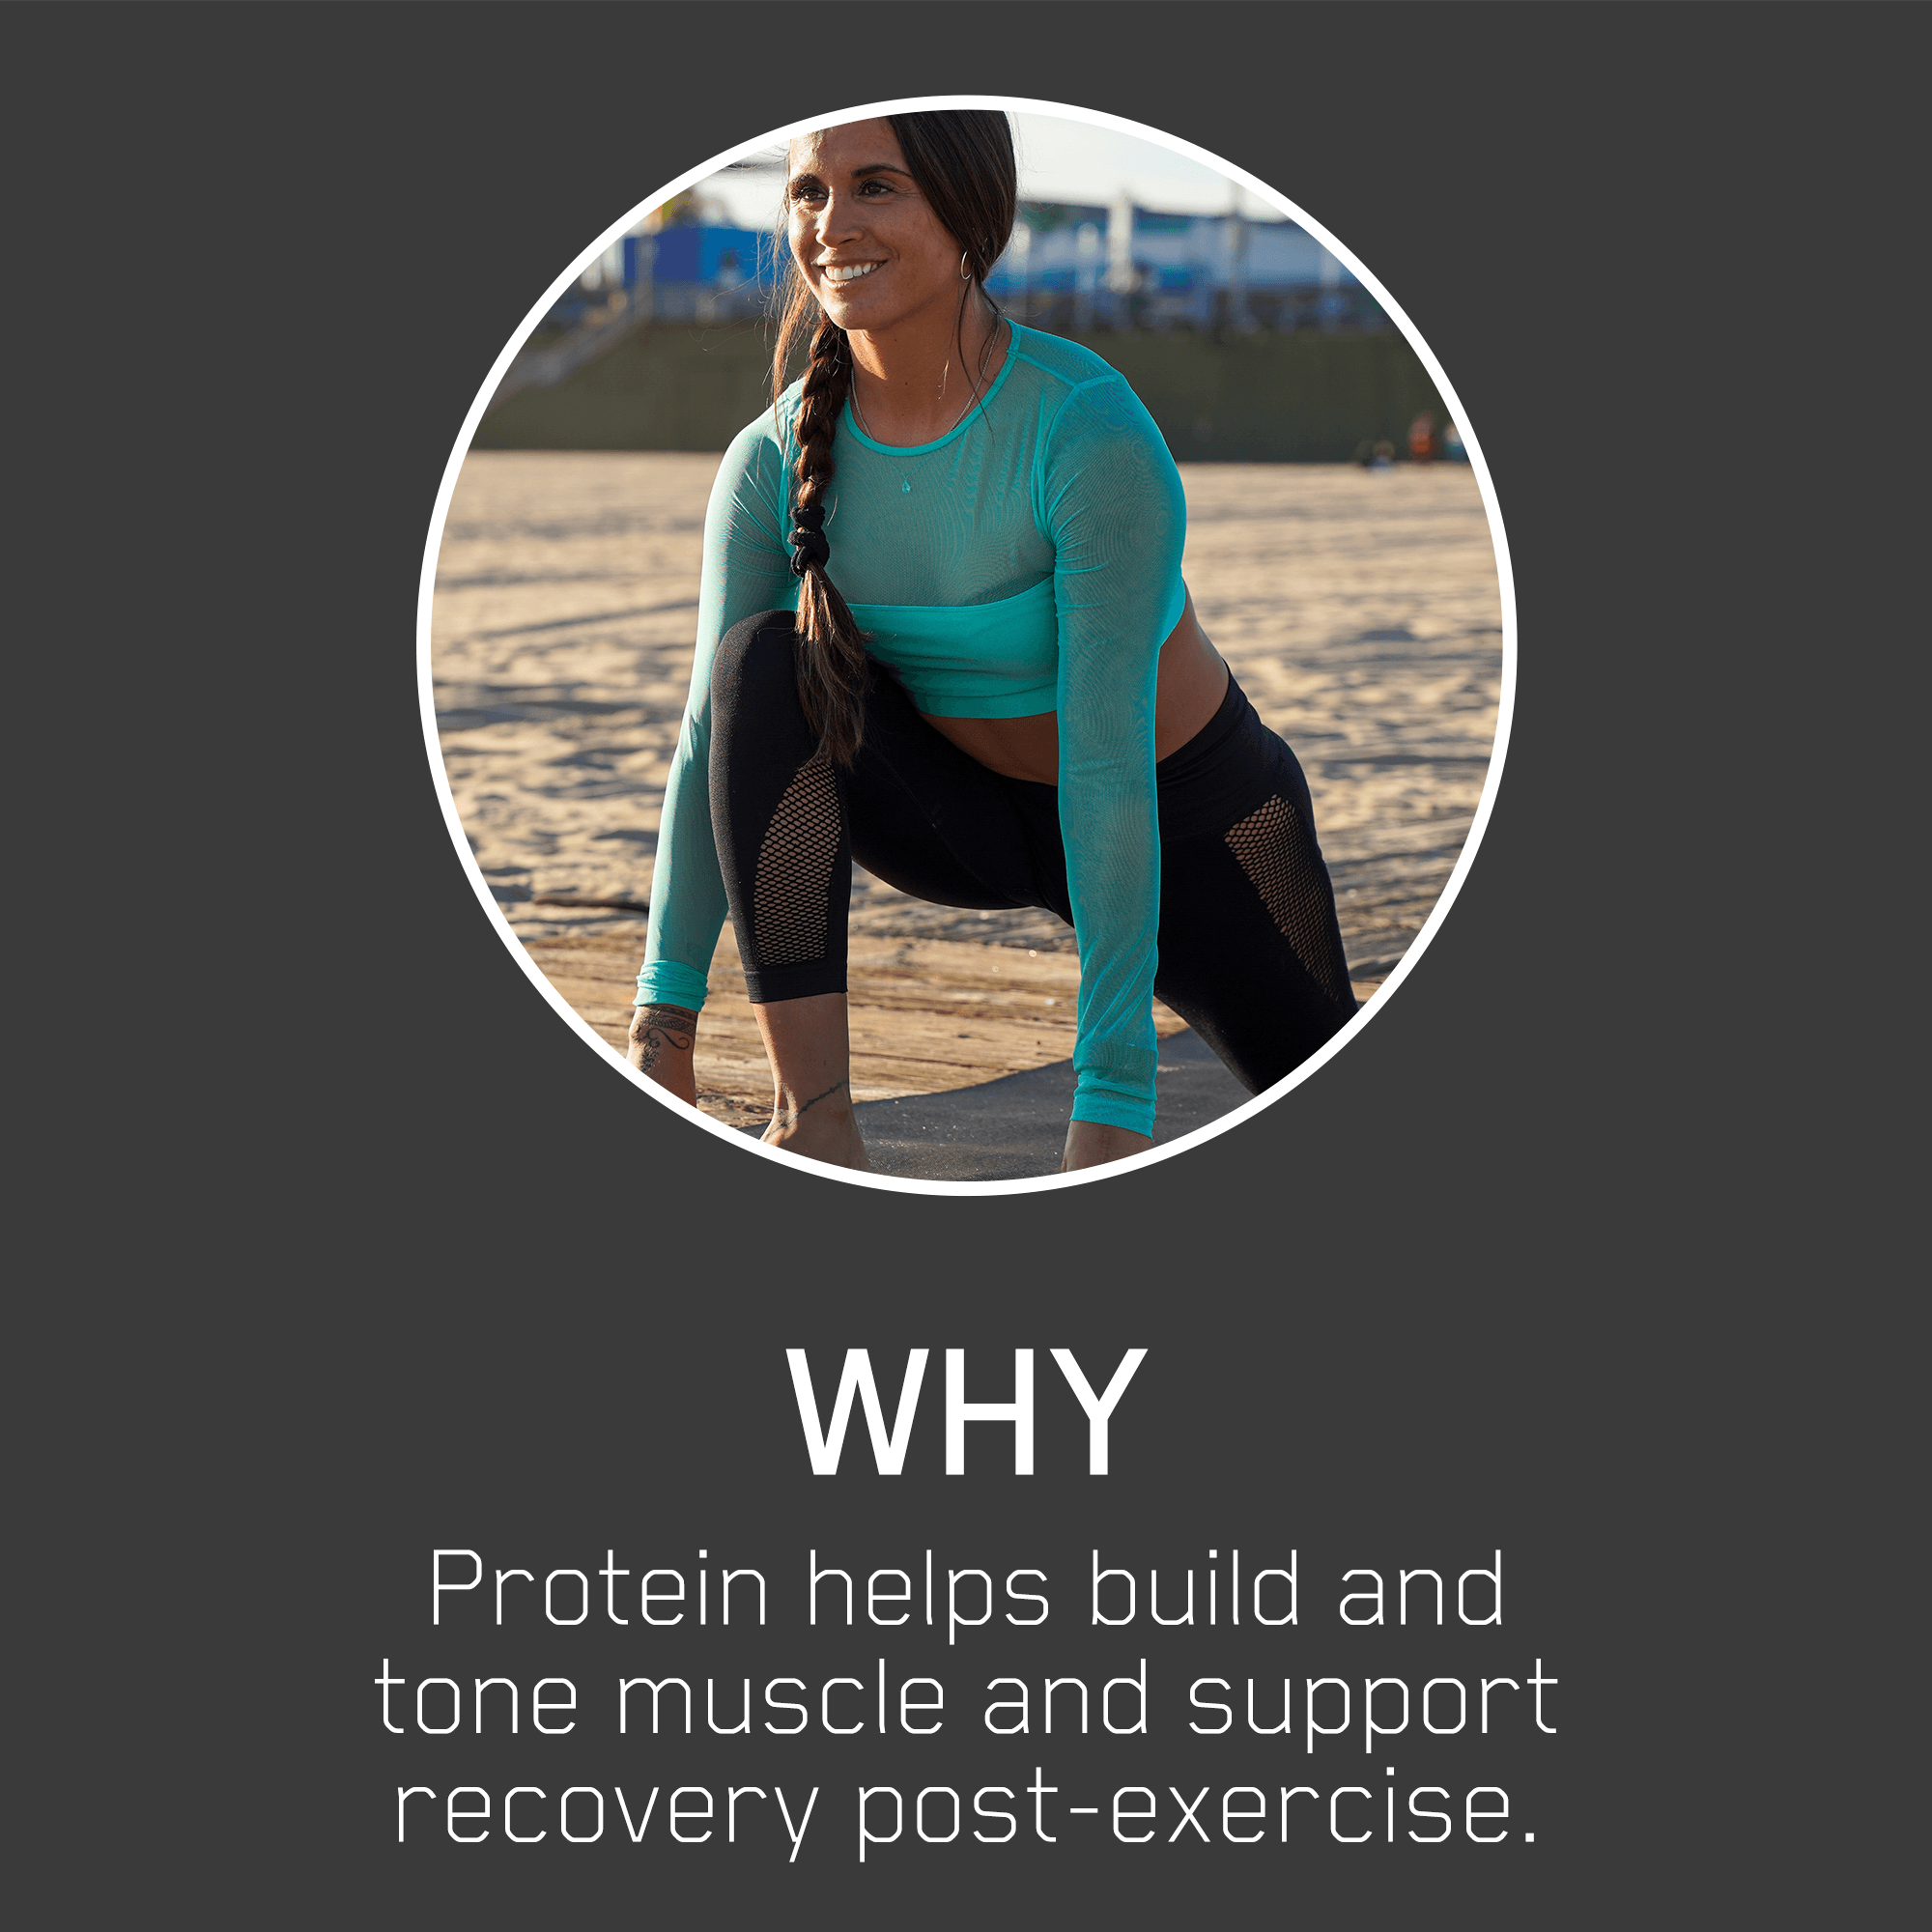 WHY: Protein helps build and tone muscle and support recovery post-exercise.